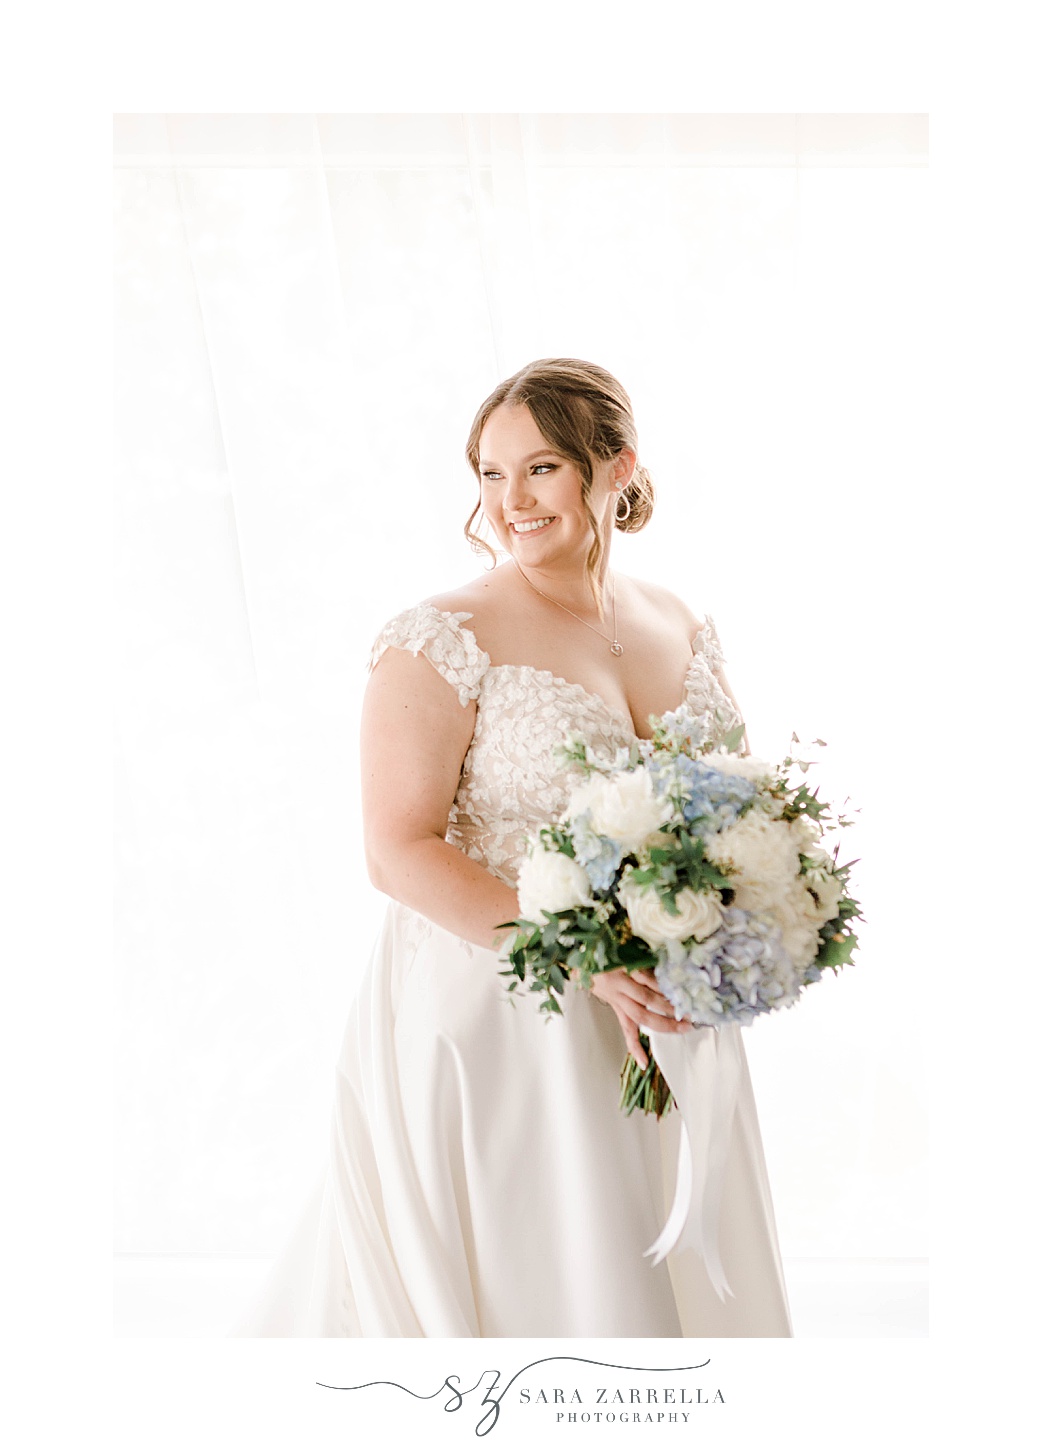 bride smiles looking over shoulder in wedding gown with pastel blue and white flowers 